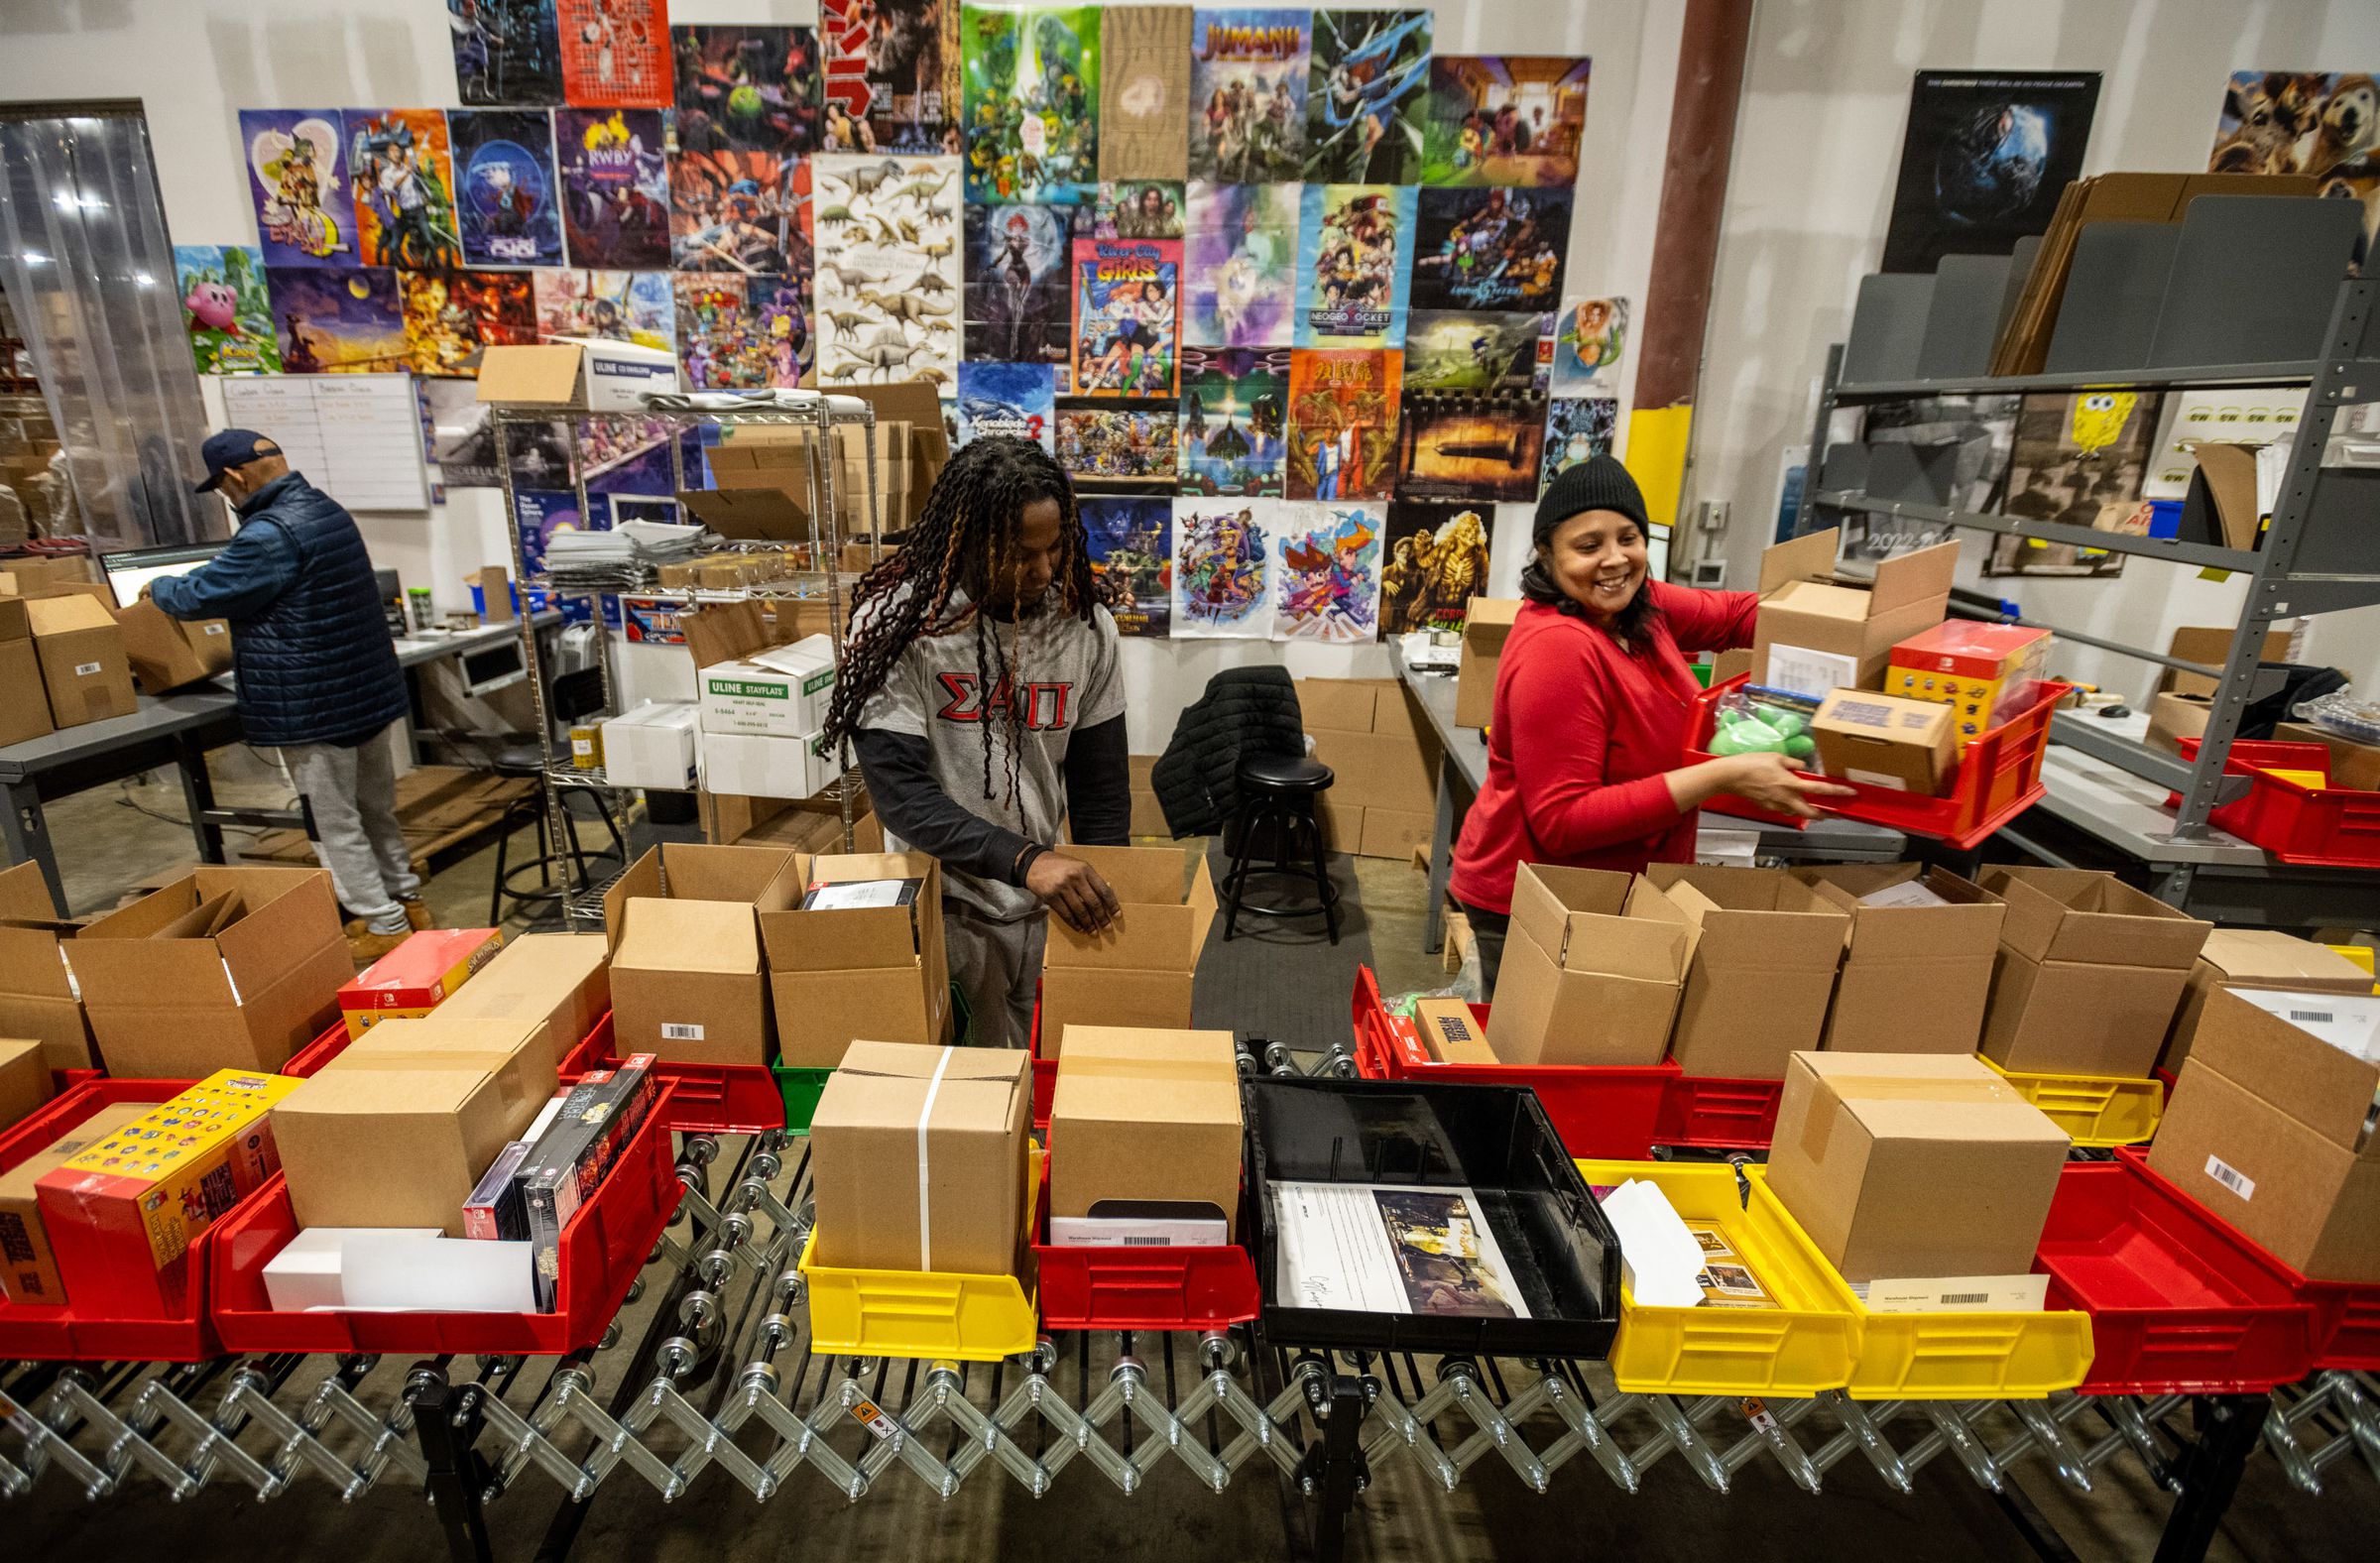 Bobby Spidey (left) and Yvette Holmes are packing games to ship out at the Limited Run Games warehouse in Apex, NC.